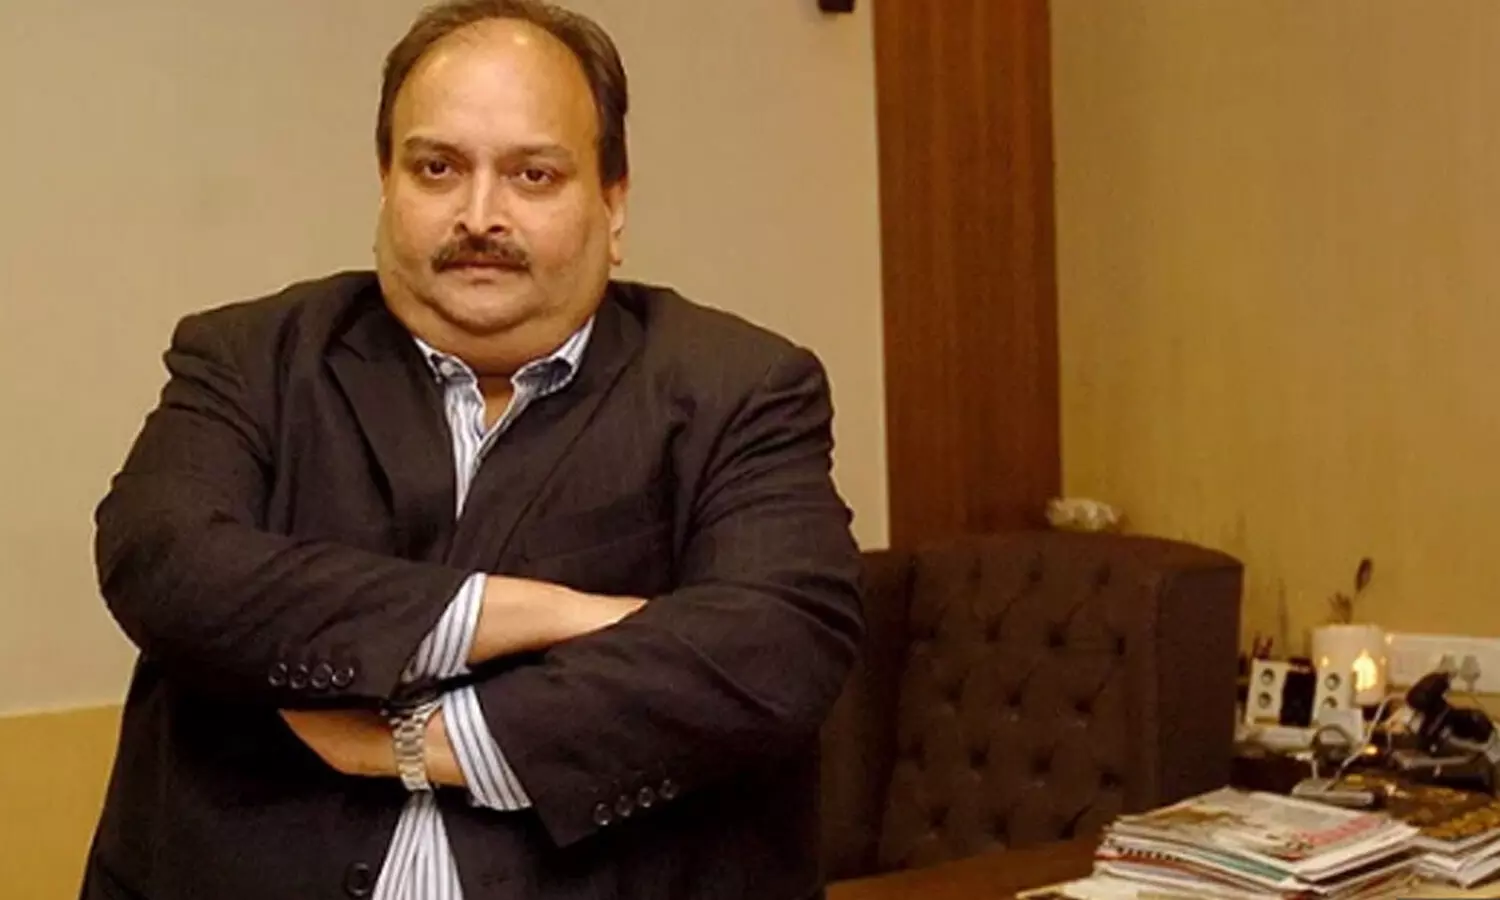 Antigua PM Browne says Mehul Choksi could be repatriated to India in 48 hours